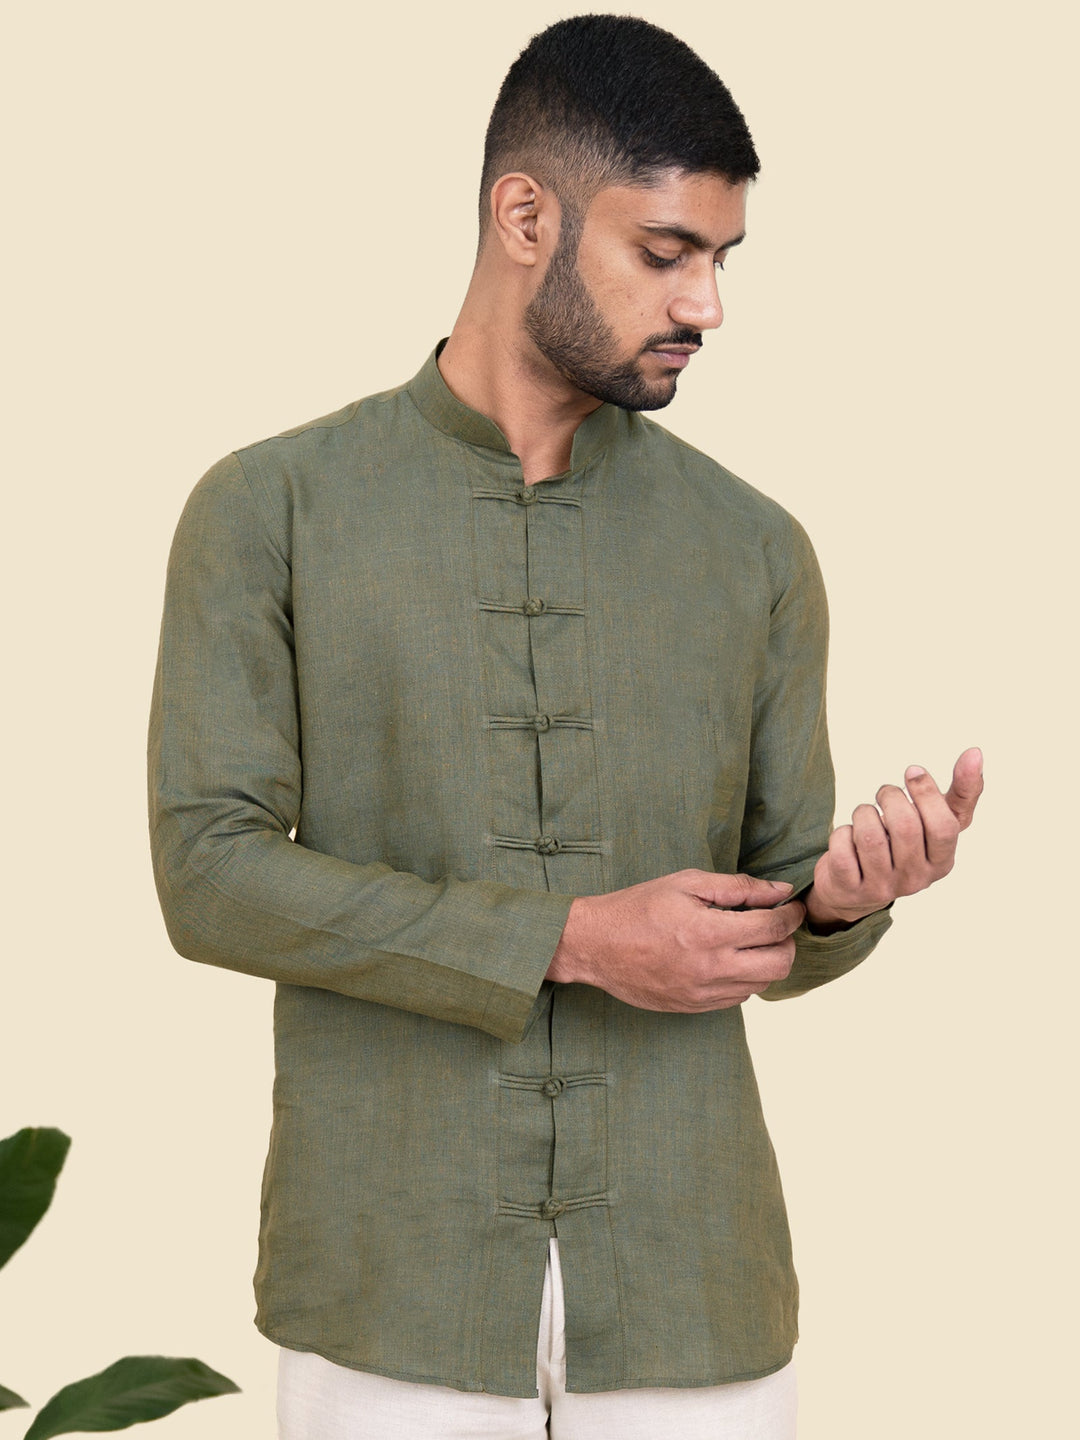 Marco - Pure Linen Full Sleeve Shirt - Seaweed Green | Rescue